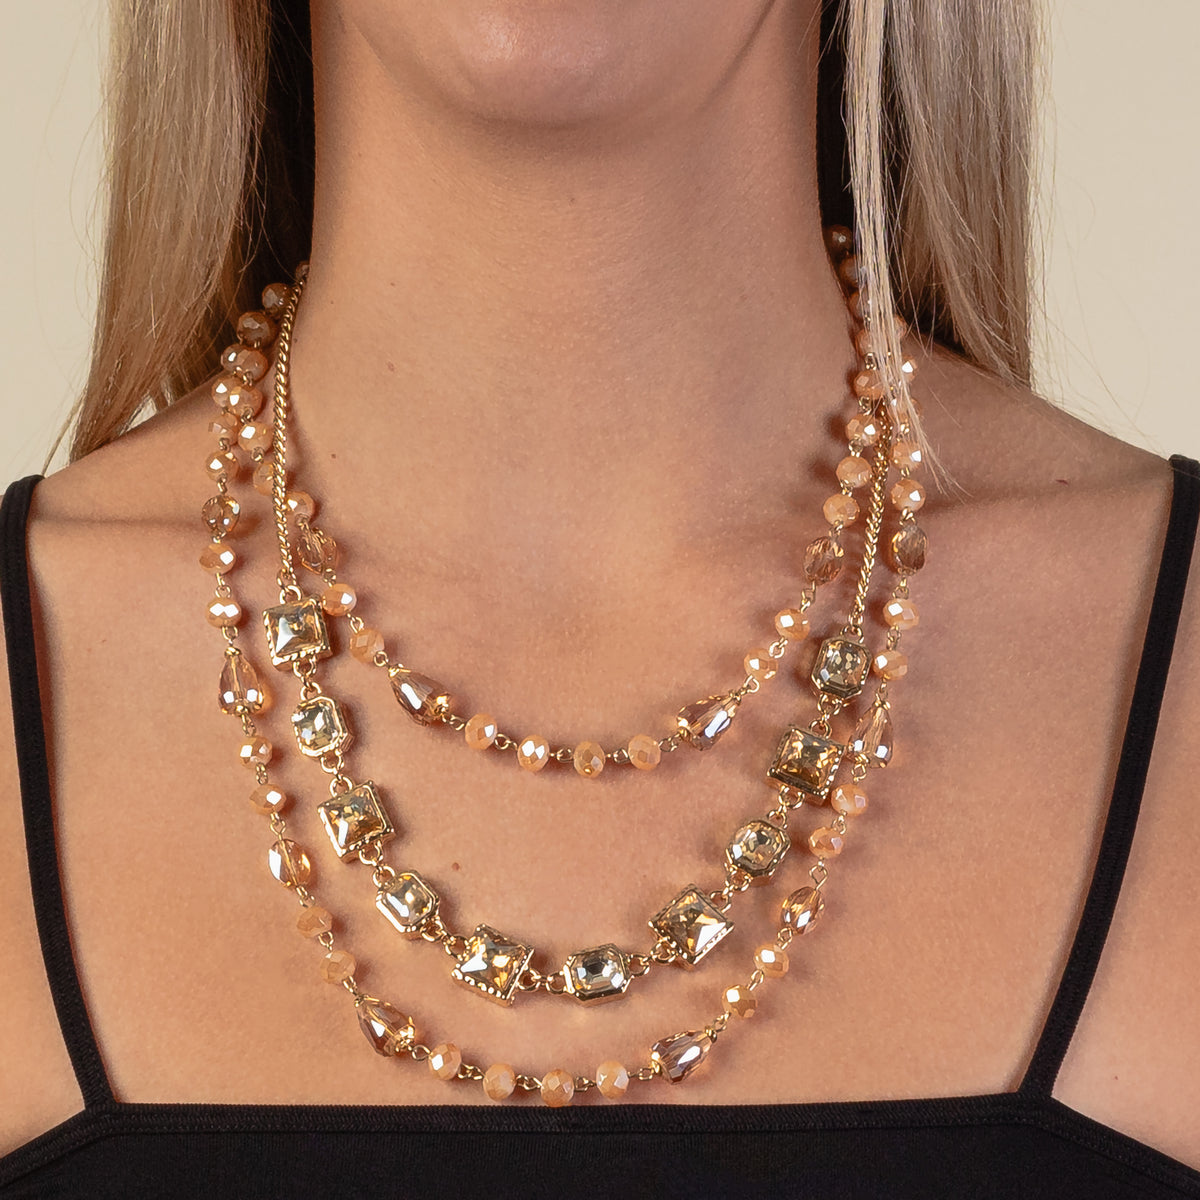 1206 - Layered Beaded Necklace - Gold